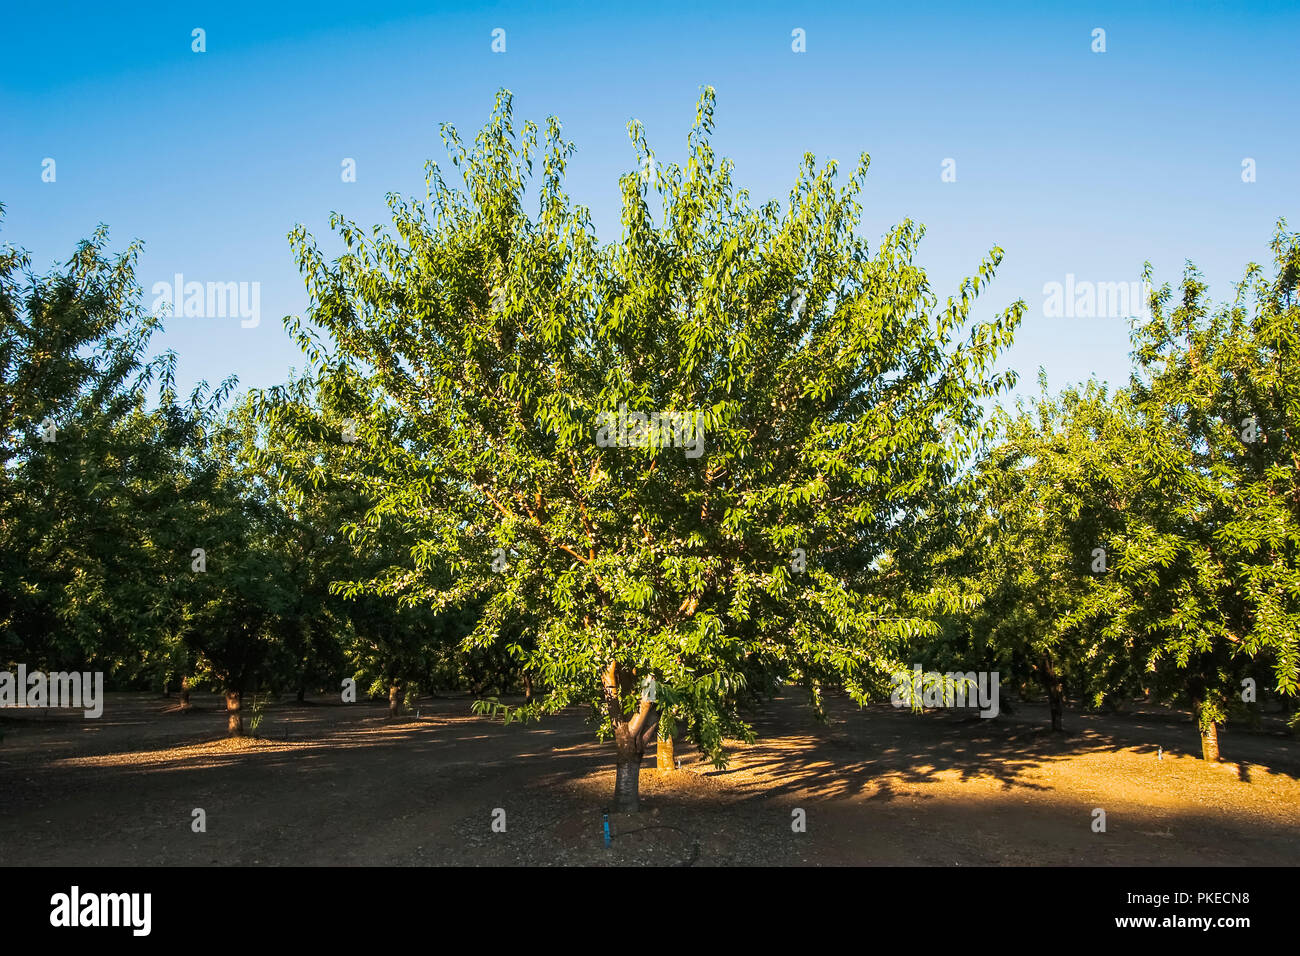 Agriculture - Mature well maintained almond orchard in mid season late afternoon light / near Newman, San Joaquin Valley, California, USA. Stock Photo